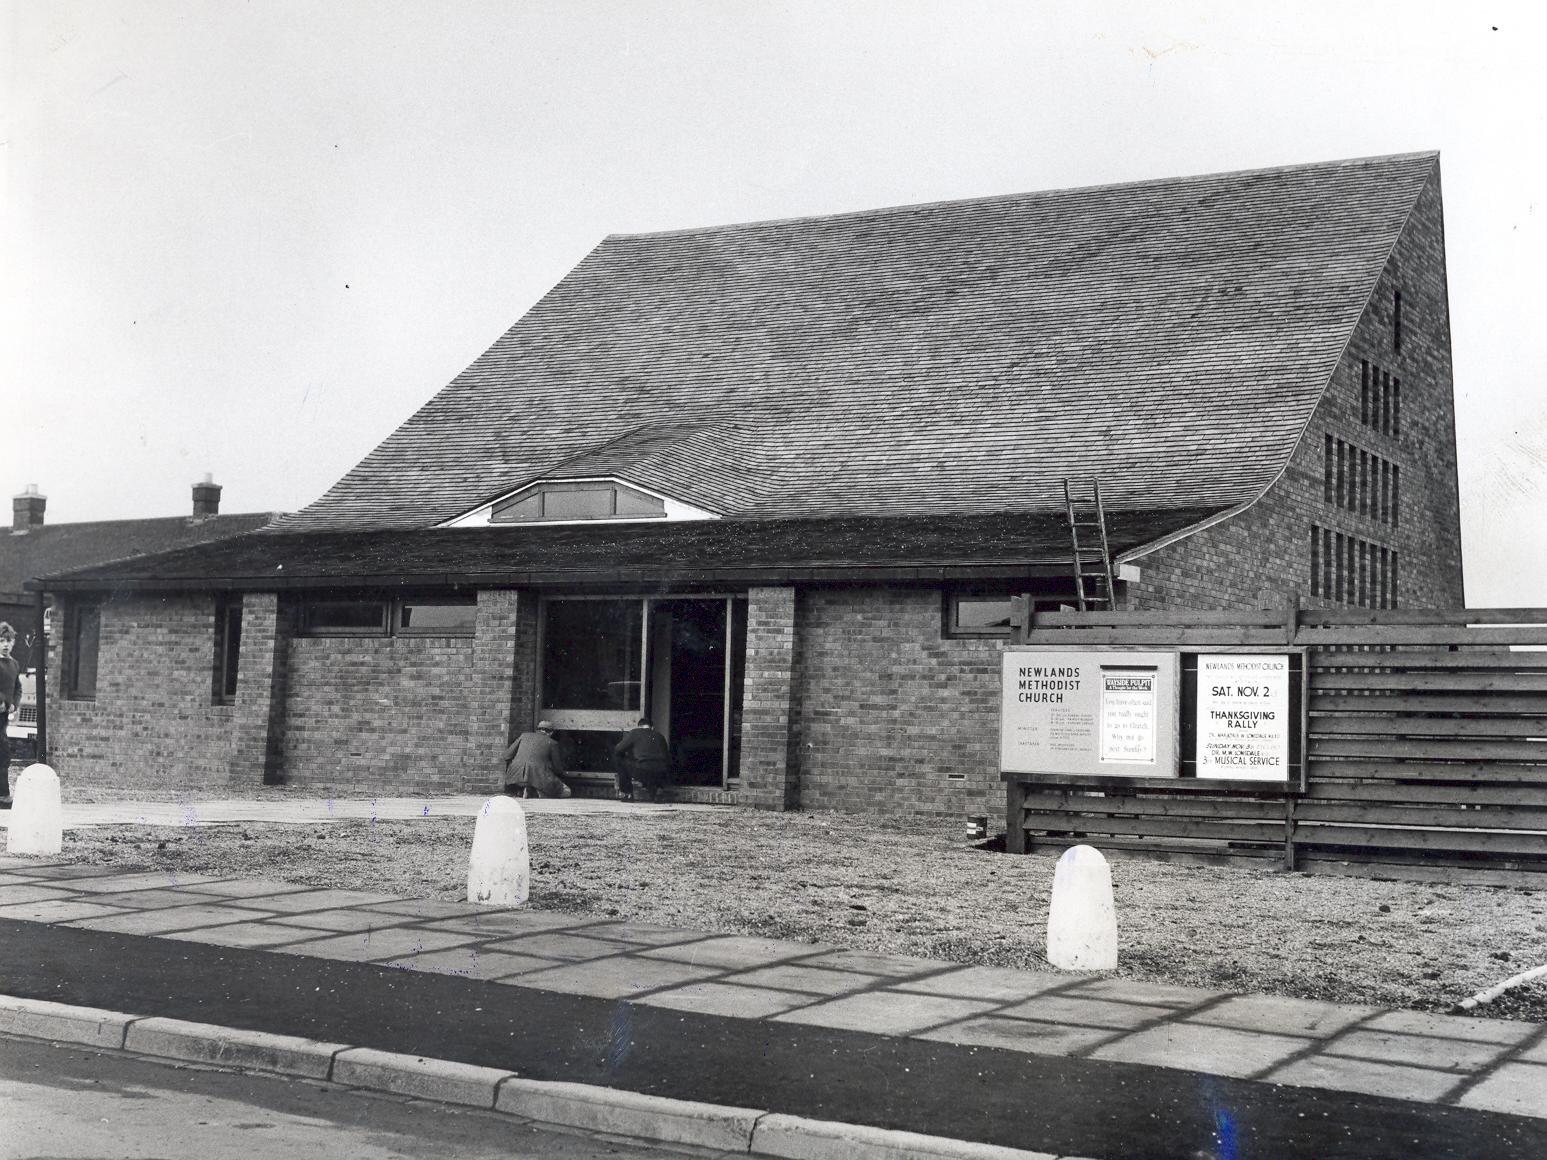 A new church opened in Morley - the Newlands Methodist Church on Albert Drive, which could hold a congregation of 250.